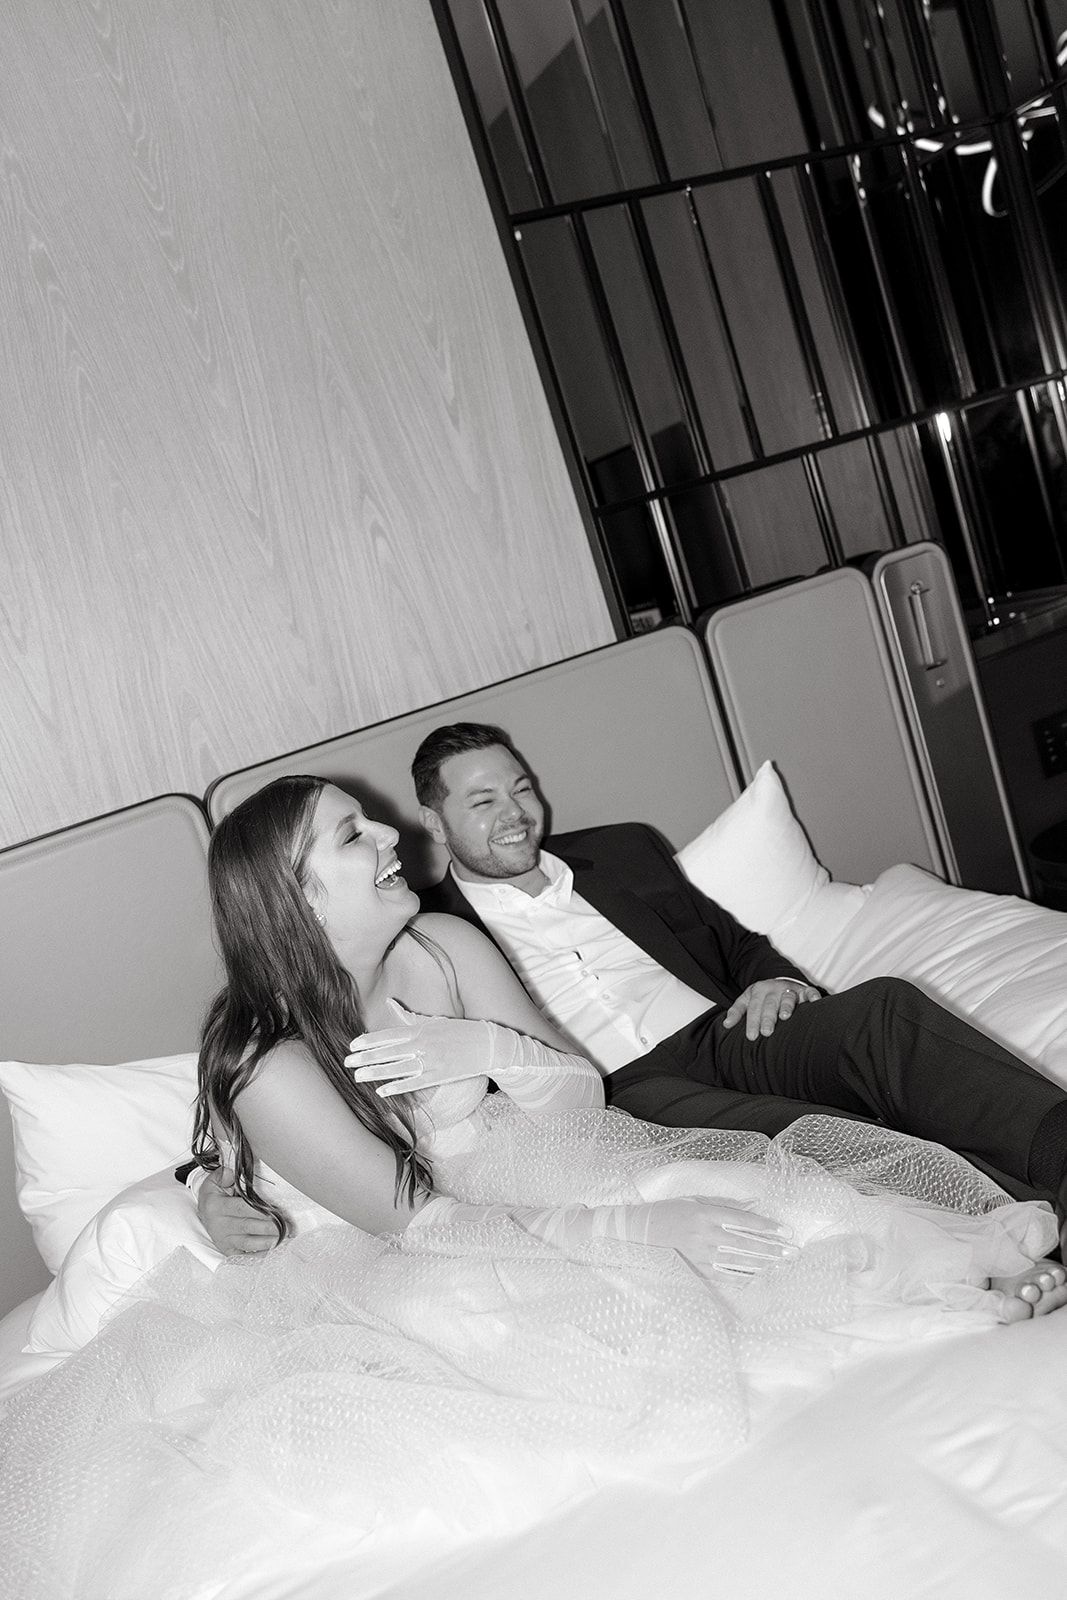 A couple who eloped in NYC sit on a hotel bed and laugh together